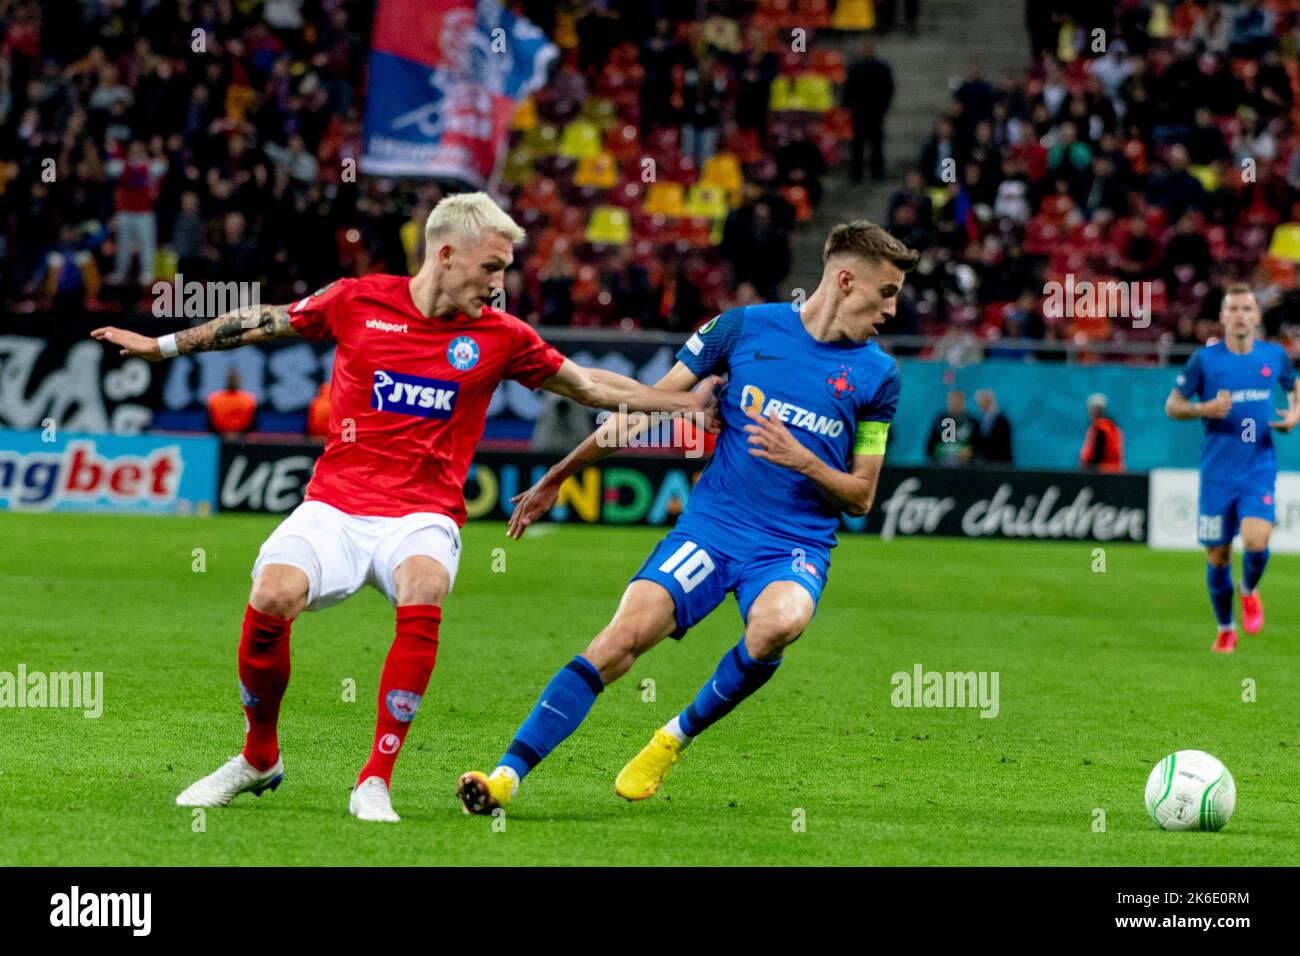 Bucharest, Romania. 13th Oct, 2022. October 13, 2022: Oliver Sonne #5 of Silkeborg IF and Octavian Popescu #10 of FCSB during of the UEFA Europa Conference League group B match between FCSB Bucharest and Silkeborg IF at National Arena Stadium in Bucharest, Romania ROU. Catalin Soare/Cronos Credit: Cronos/Alamy Live News Stock Photo